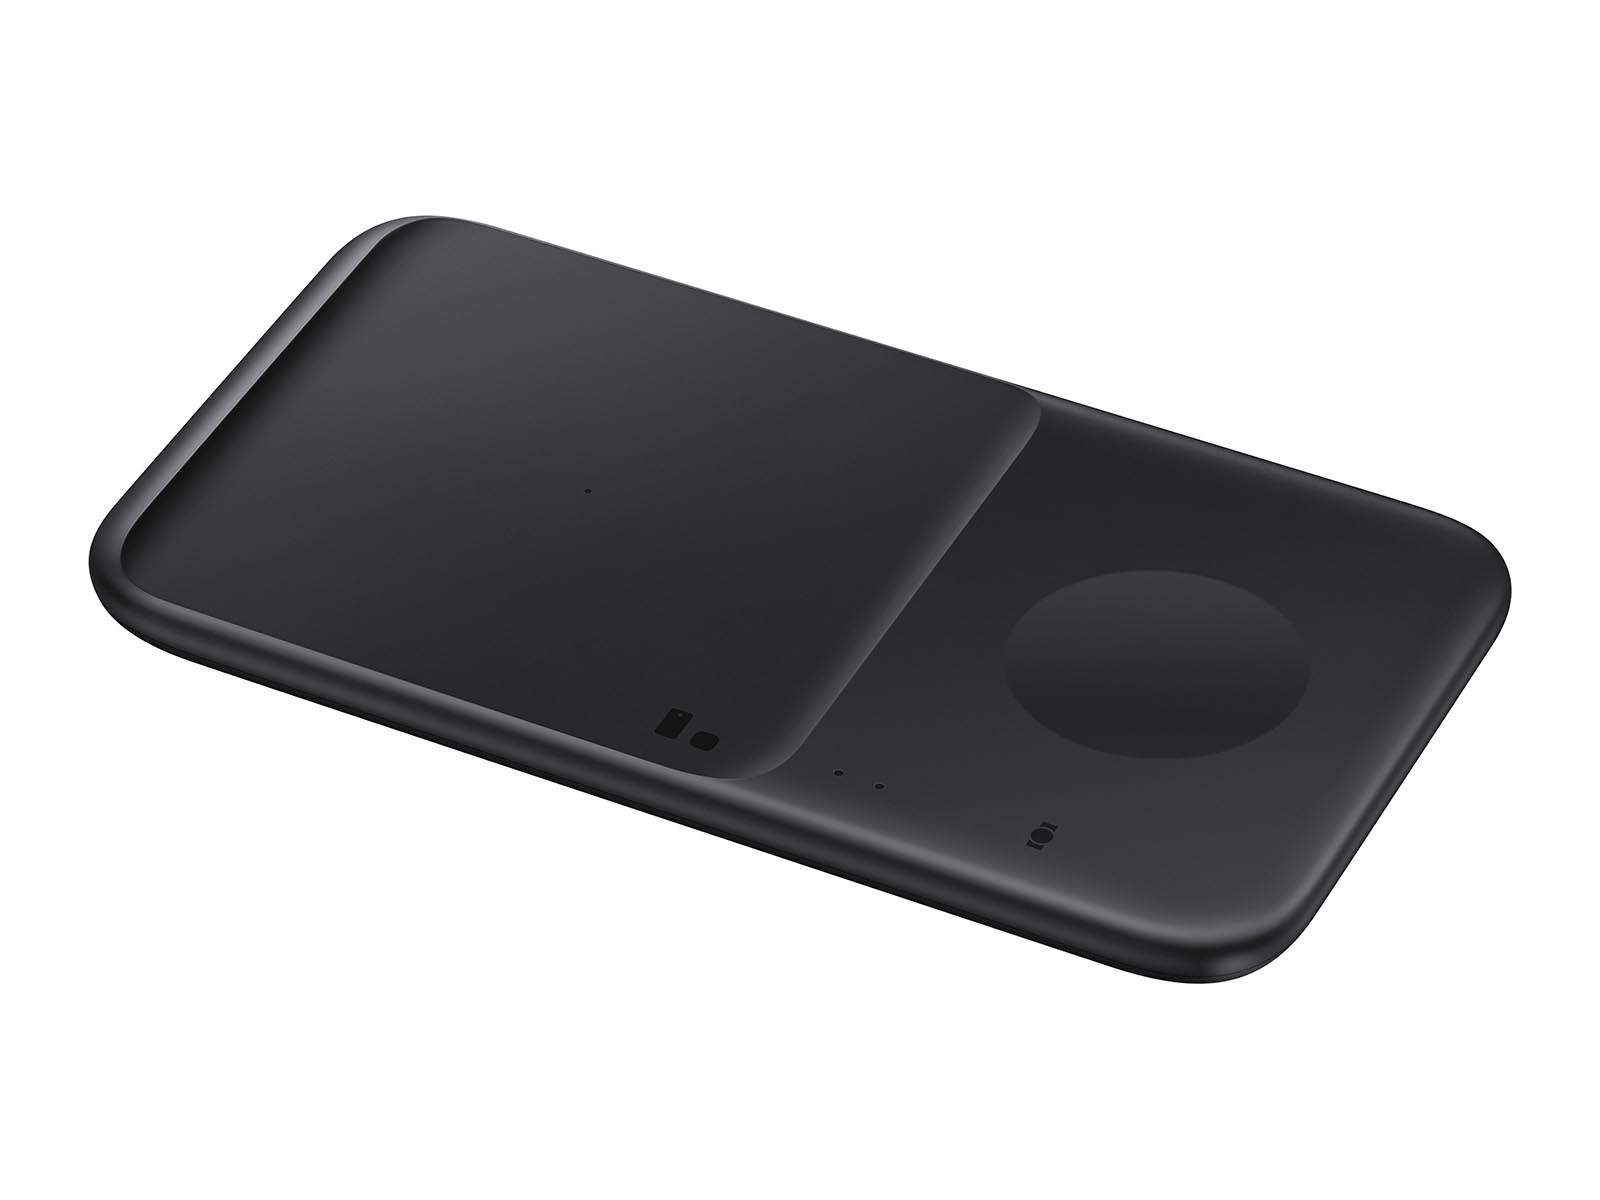 Wireless Charger Duo, Black Mobile Accessories - EP-P4300TBEGUS | Samsung US